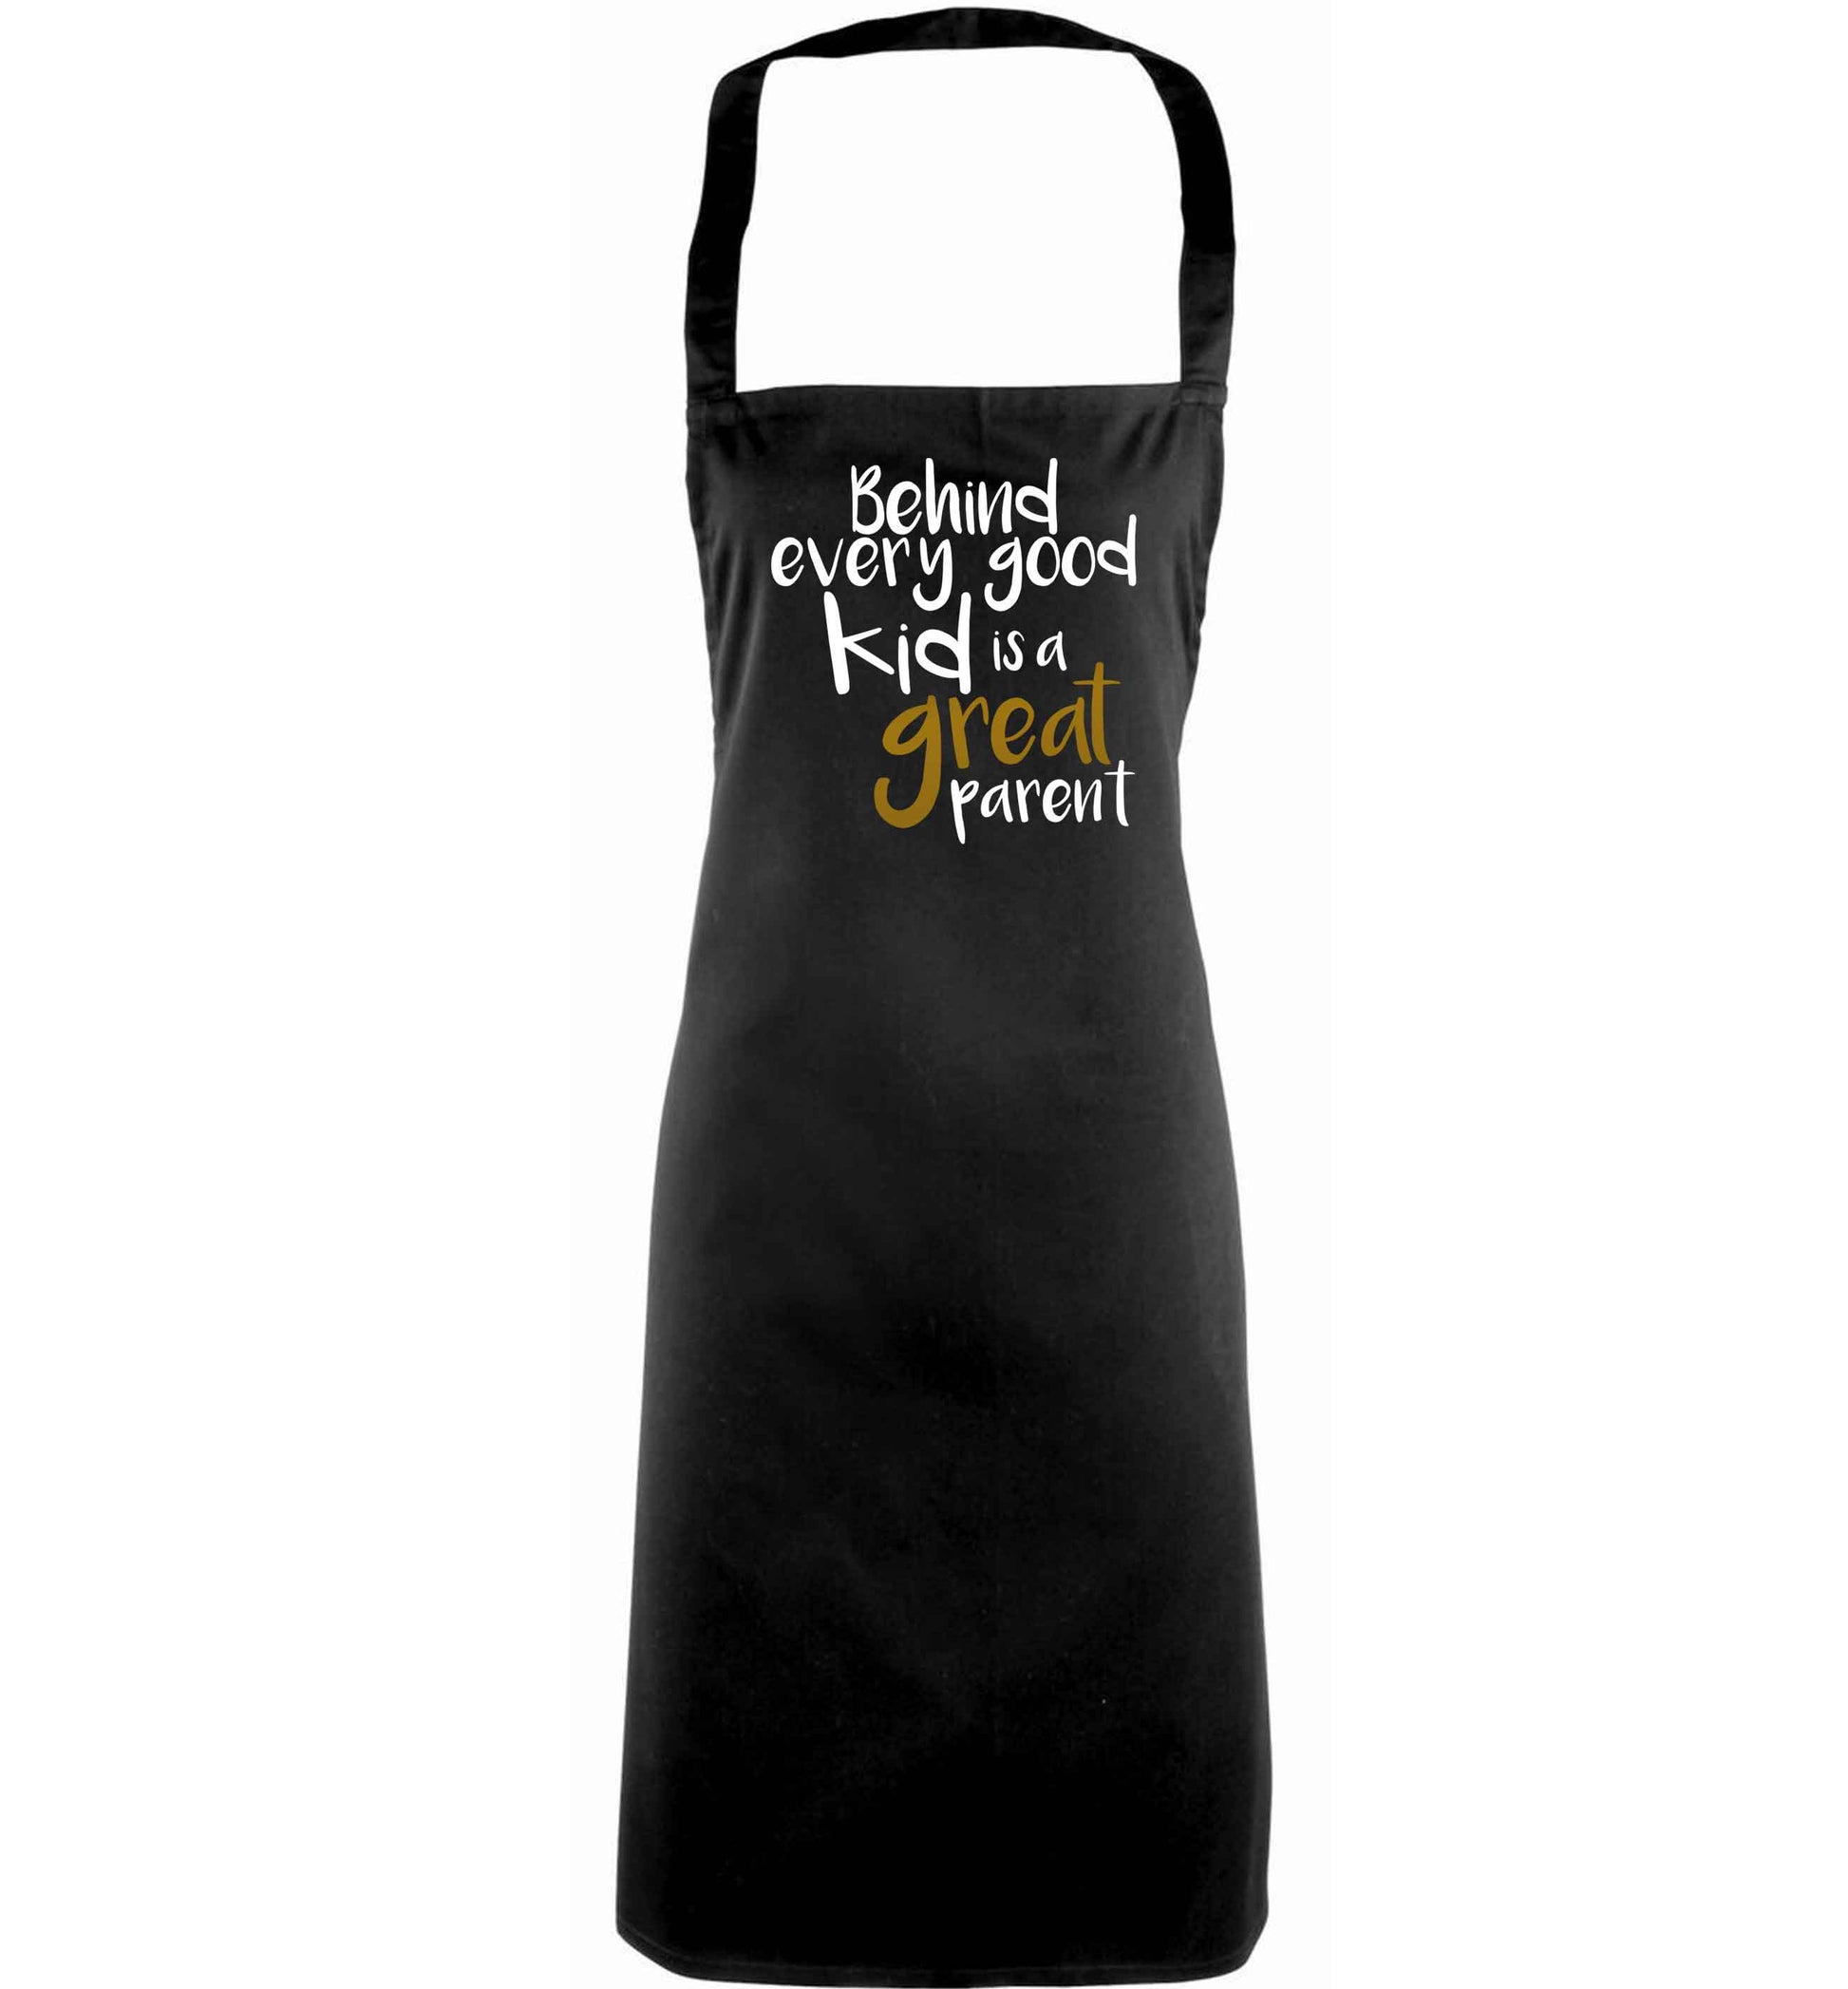 Behind every good kid is a great parent adults black apron